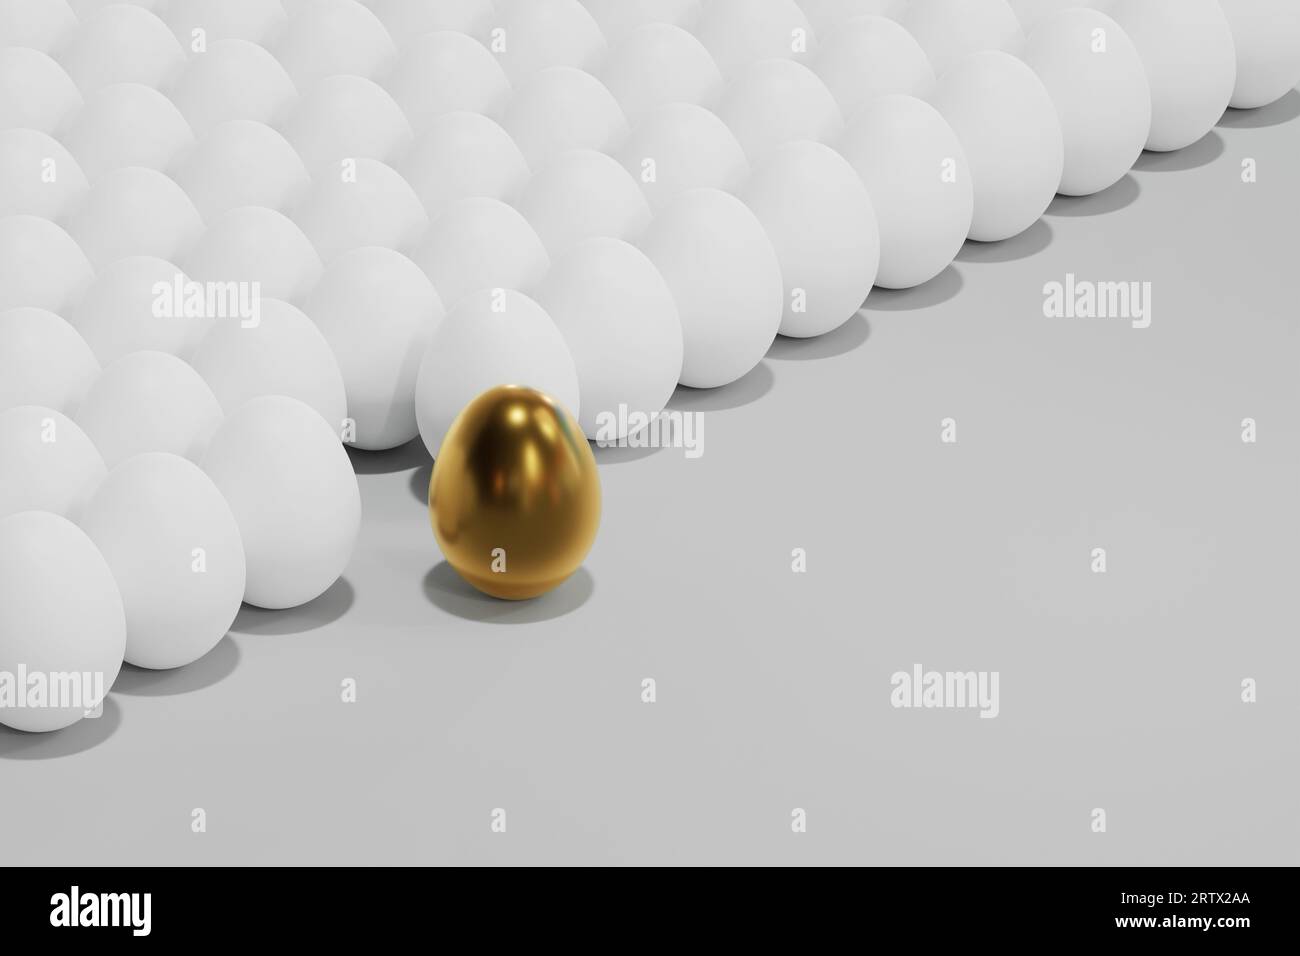 Unique Golden Egg Shines Bright Among the Ordinary. Three-dimensional illustration. Stock Photo